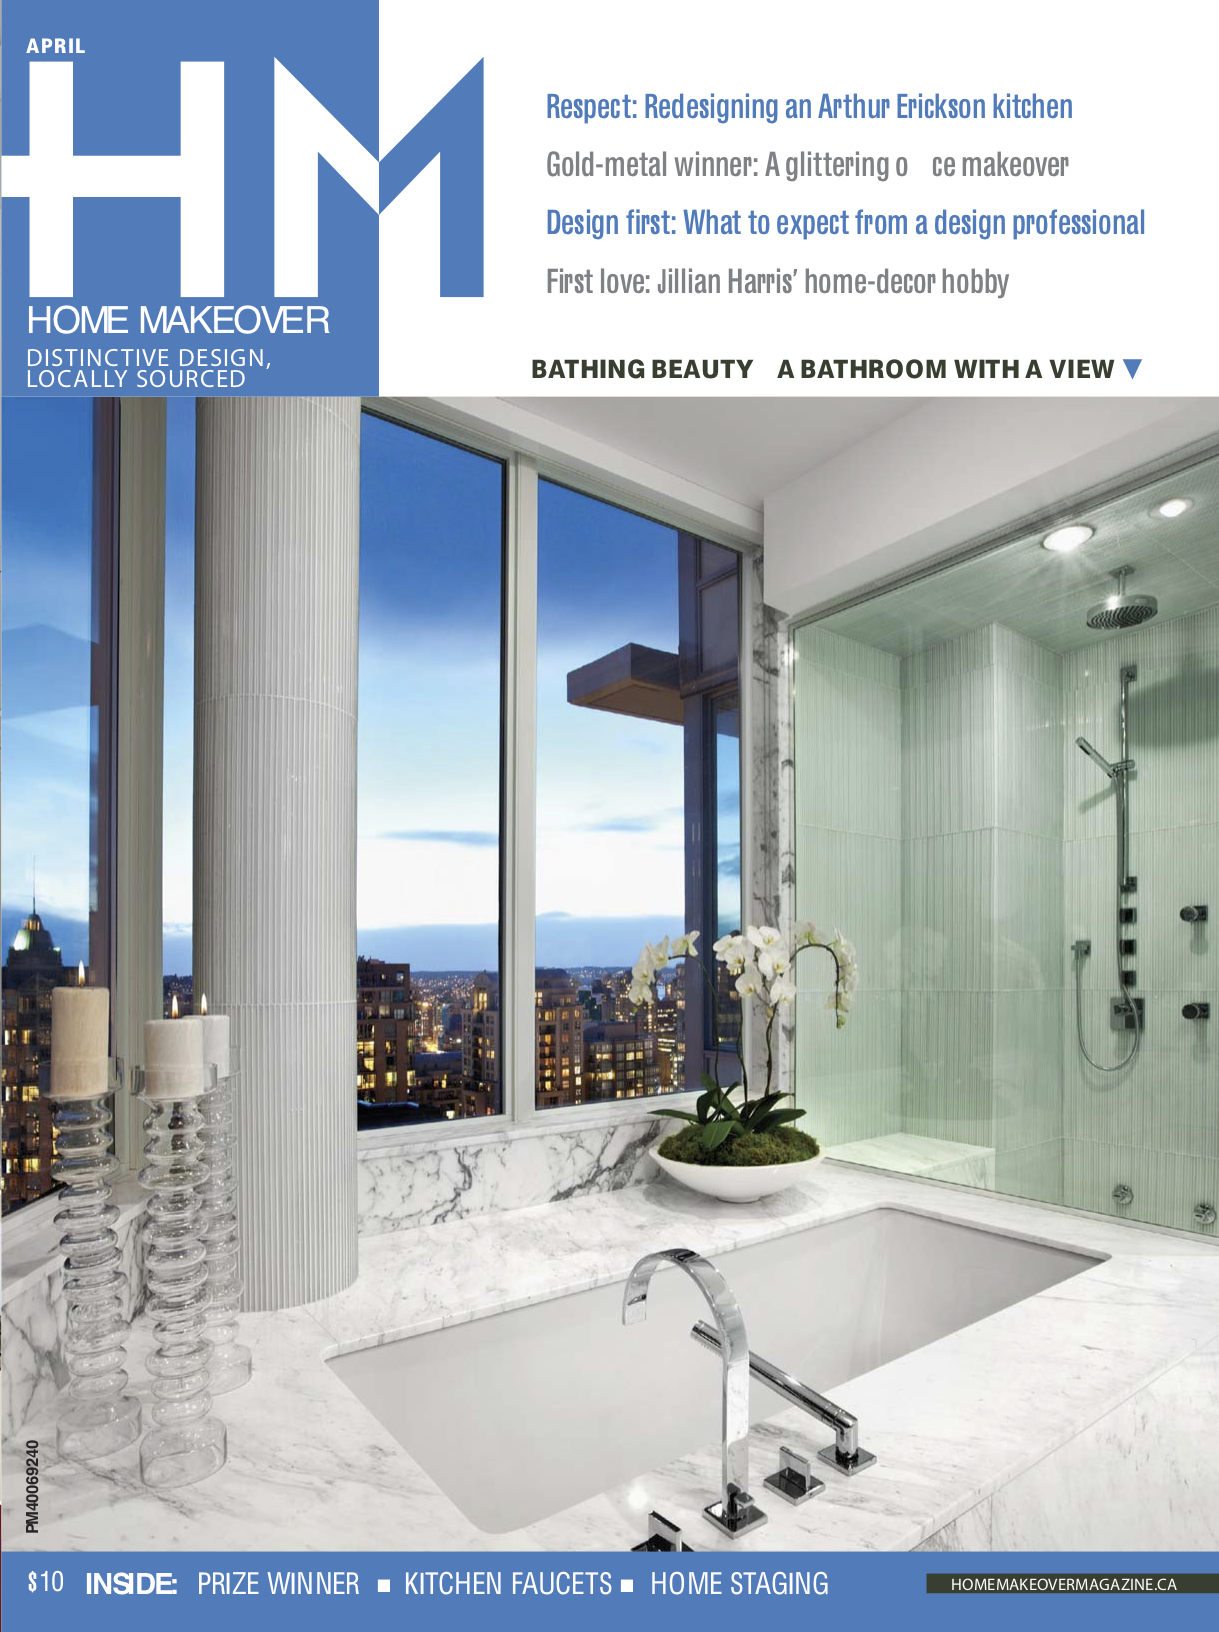 home_makeover_magazine_vancouver_-_april_2011 (dragged).png